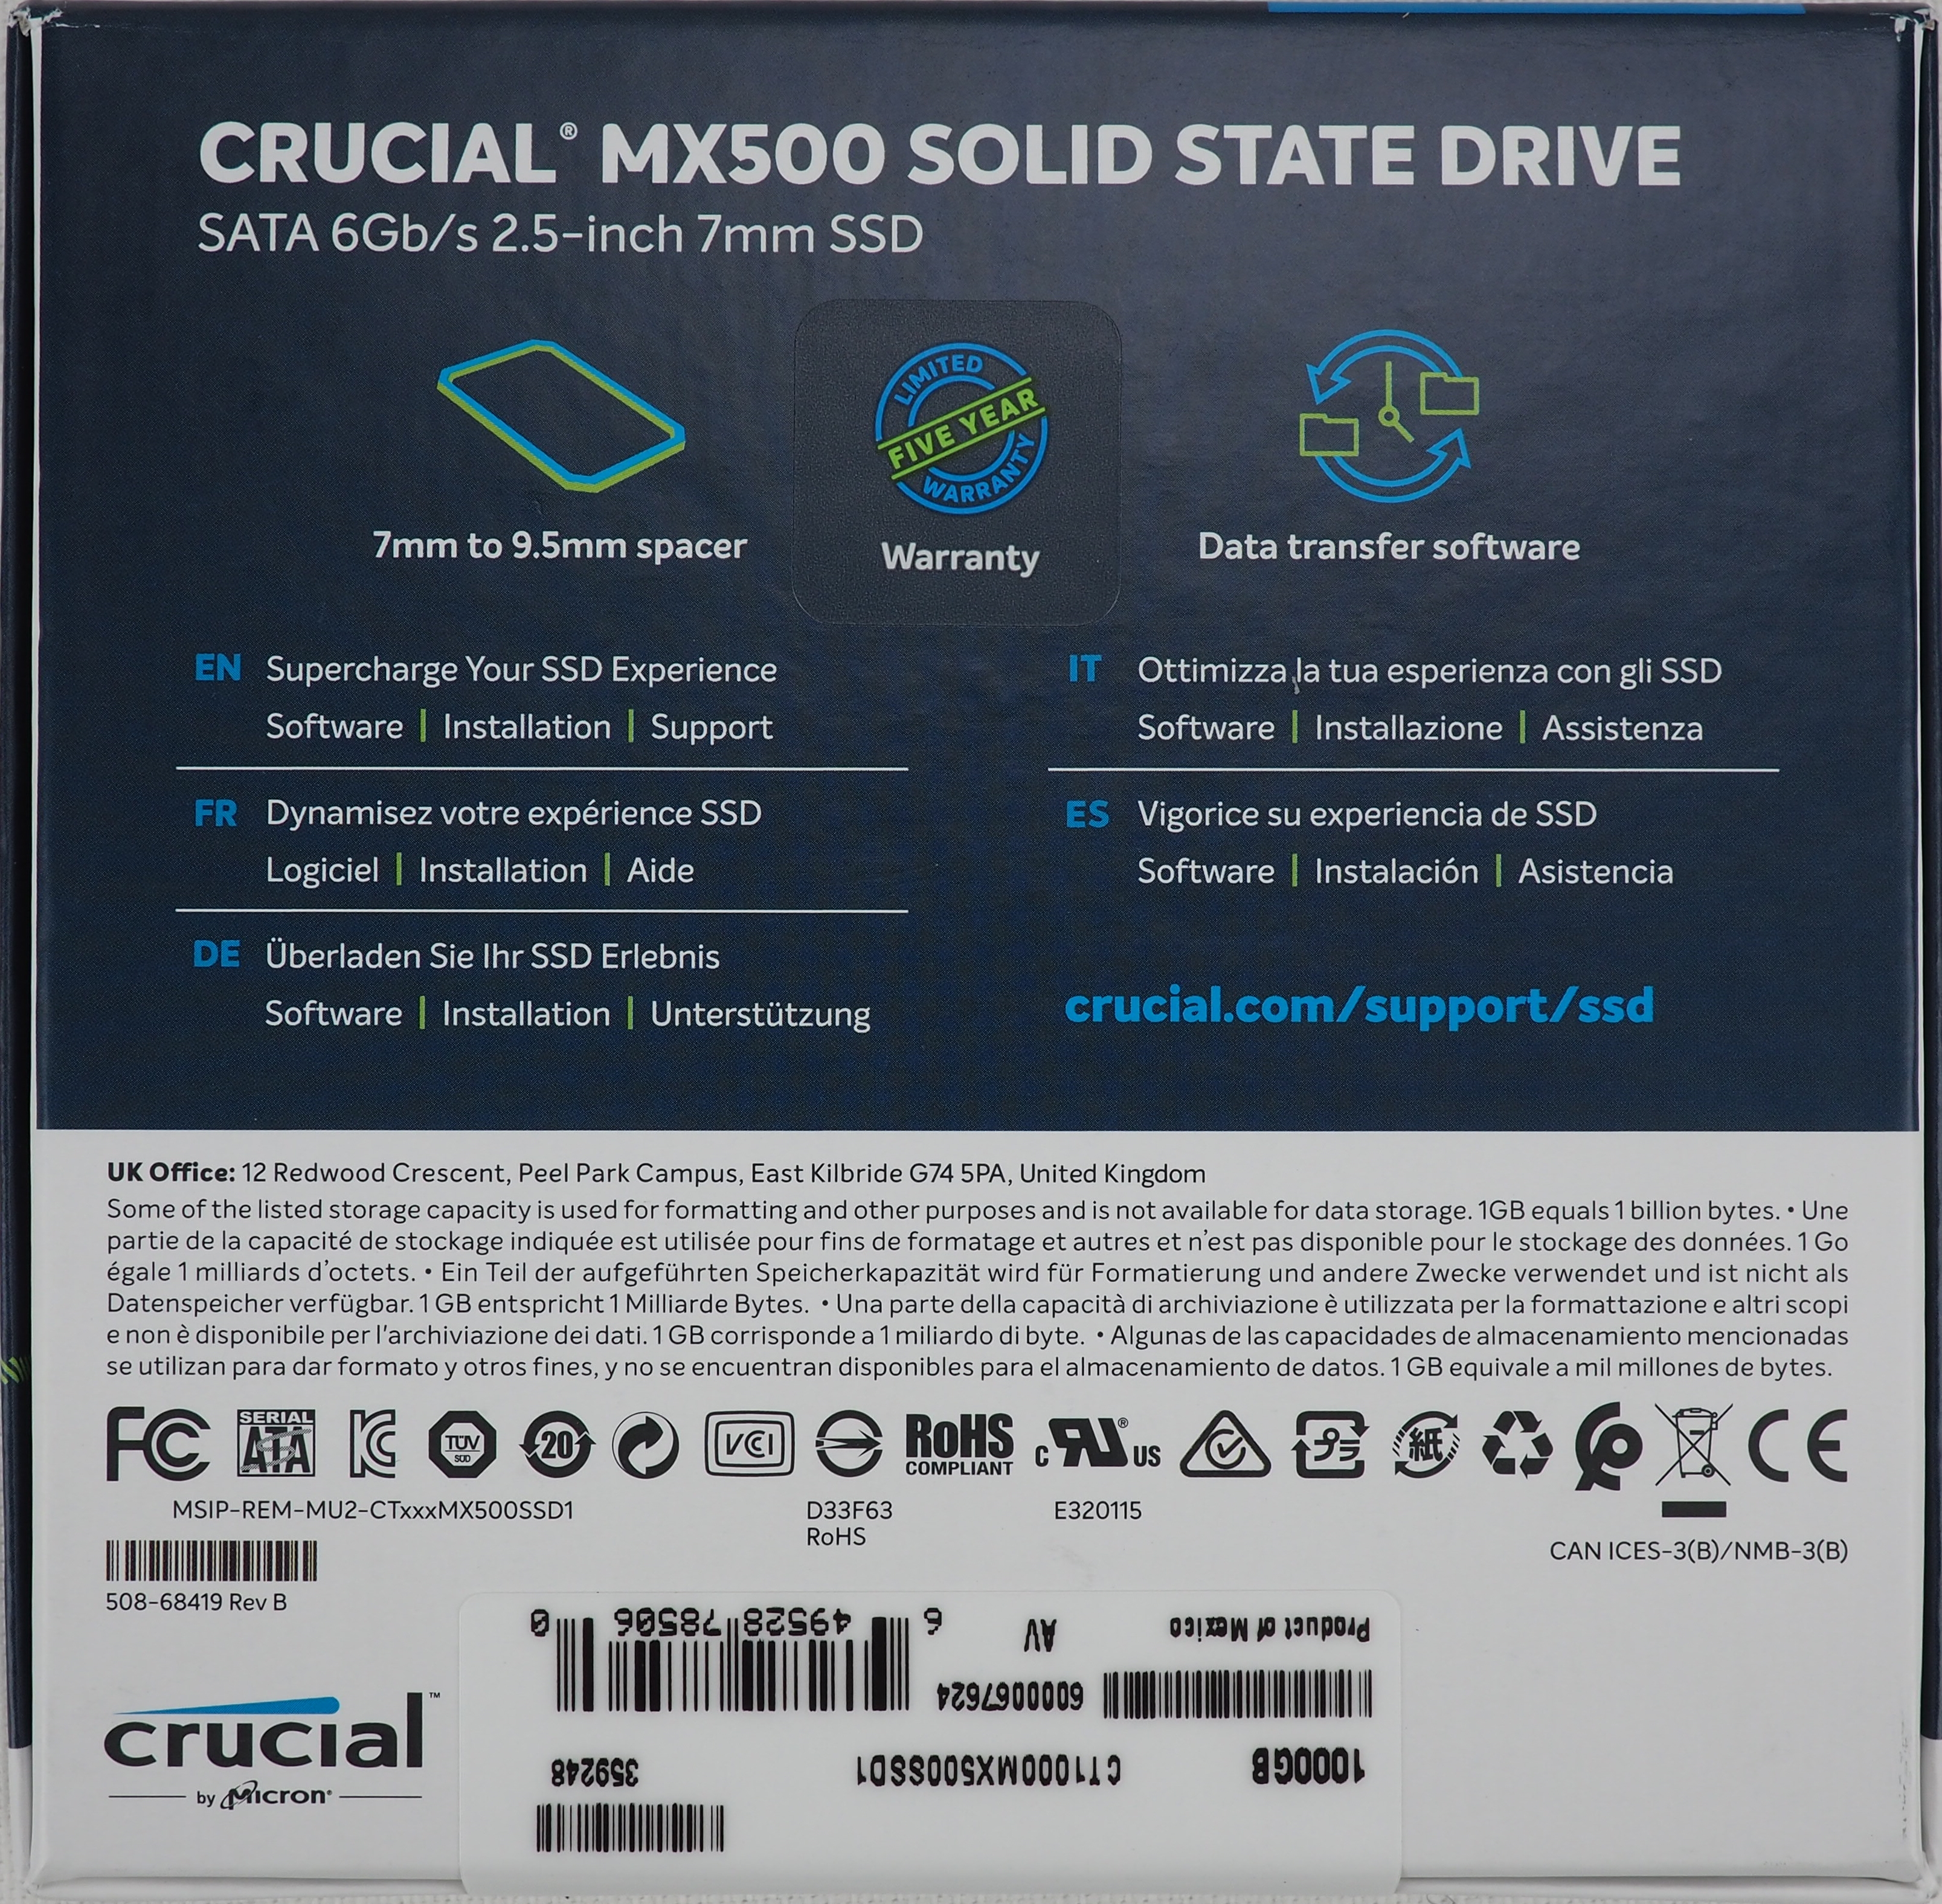 CRUCIAL MX500 - 1 To - CT1000MX500SSD1 moins cher 